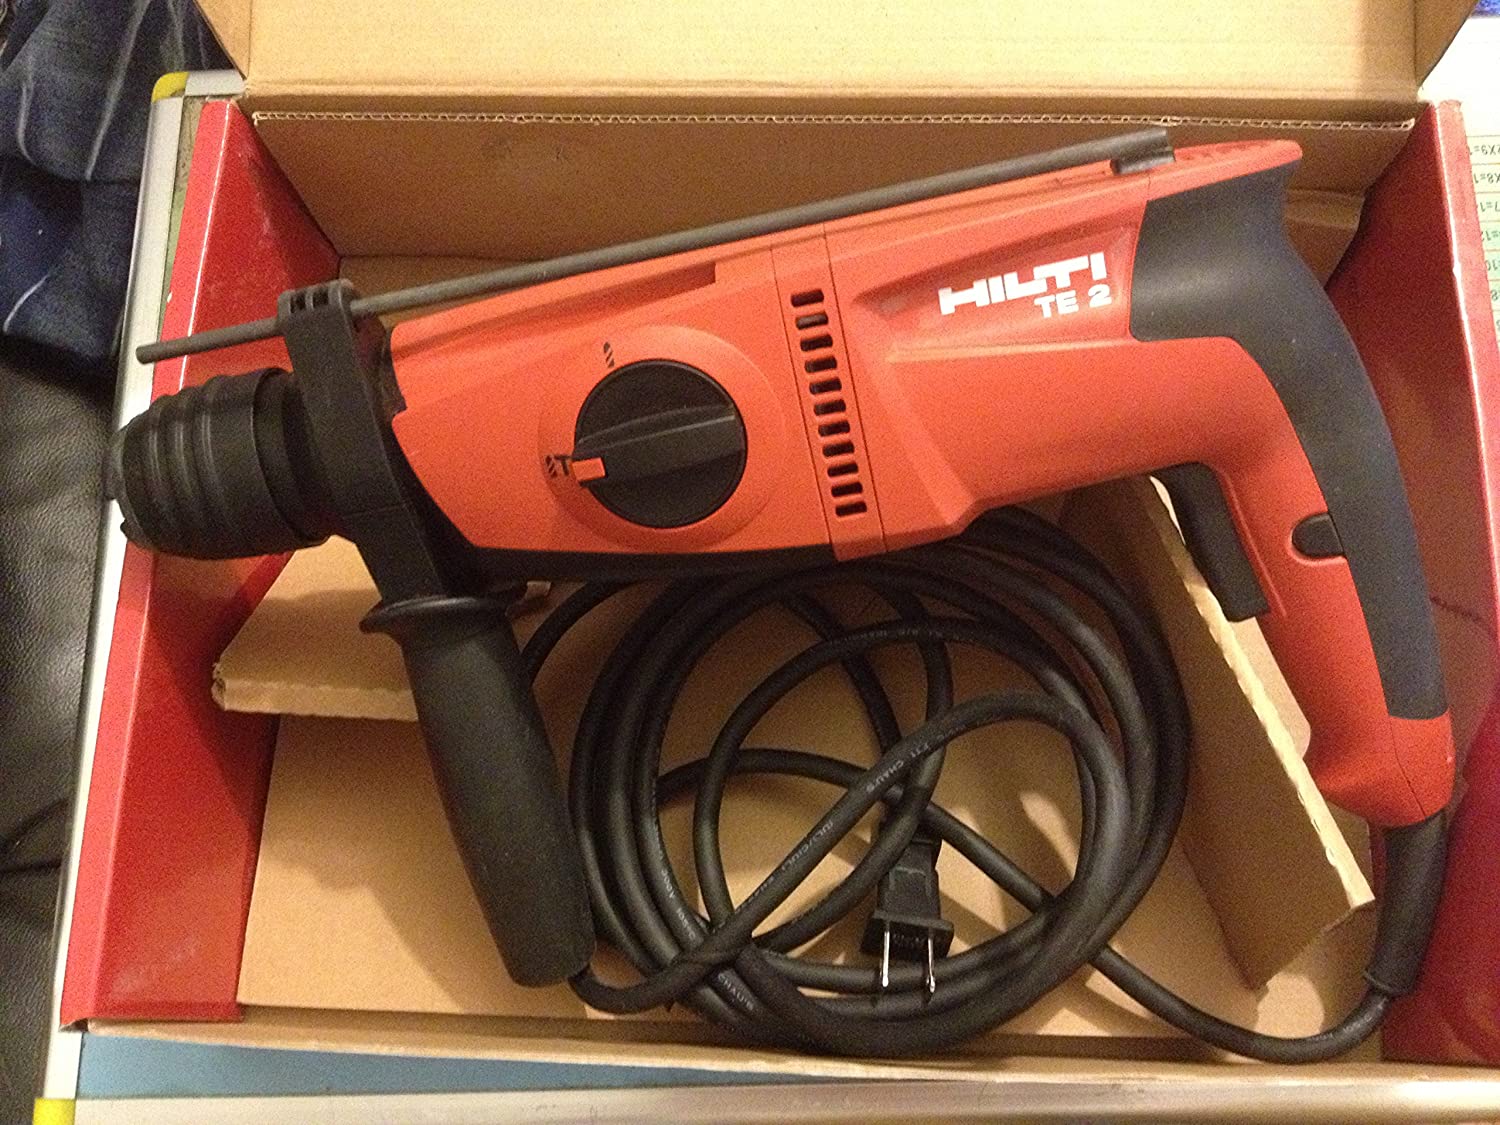 Hilti 03497788 Rotary Hammer Drill Performance Package, 120-Volt